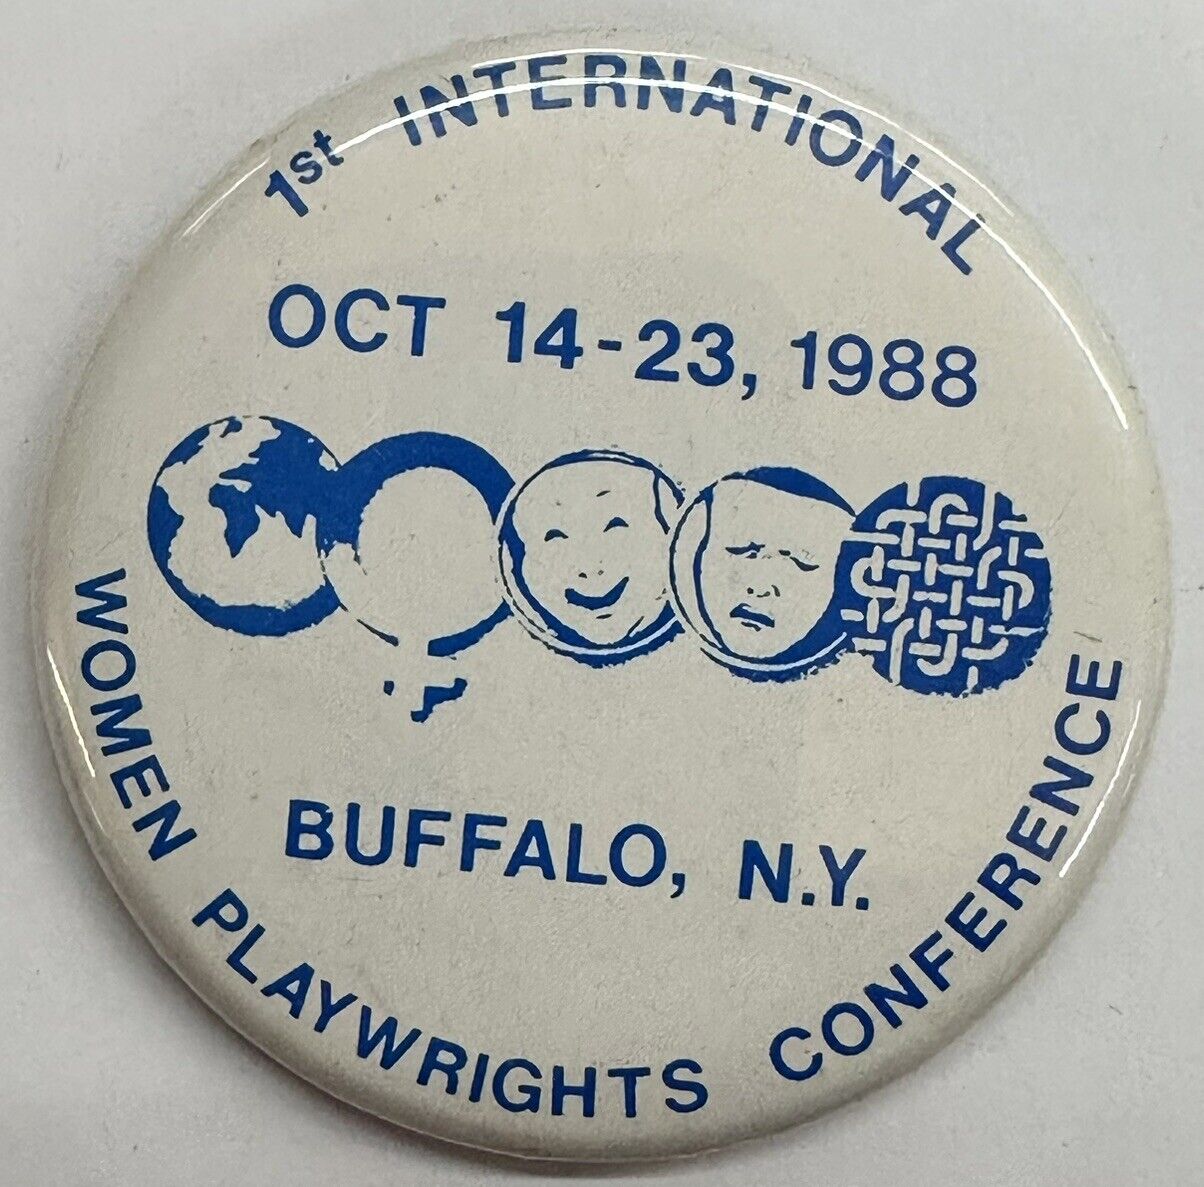 Women Playwrights Conference Buffalo NY 1st Int’l Oct 14-23, 1988 Pinback Button